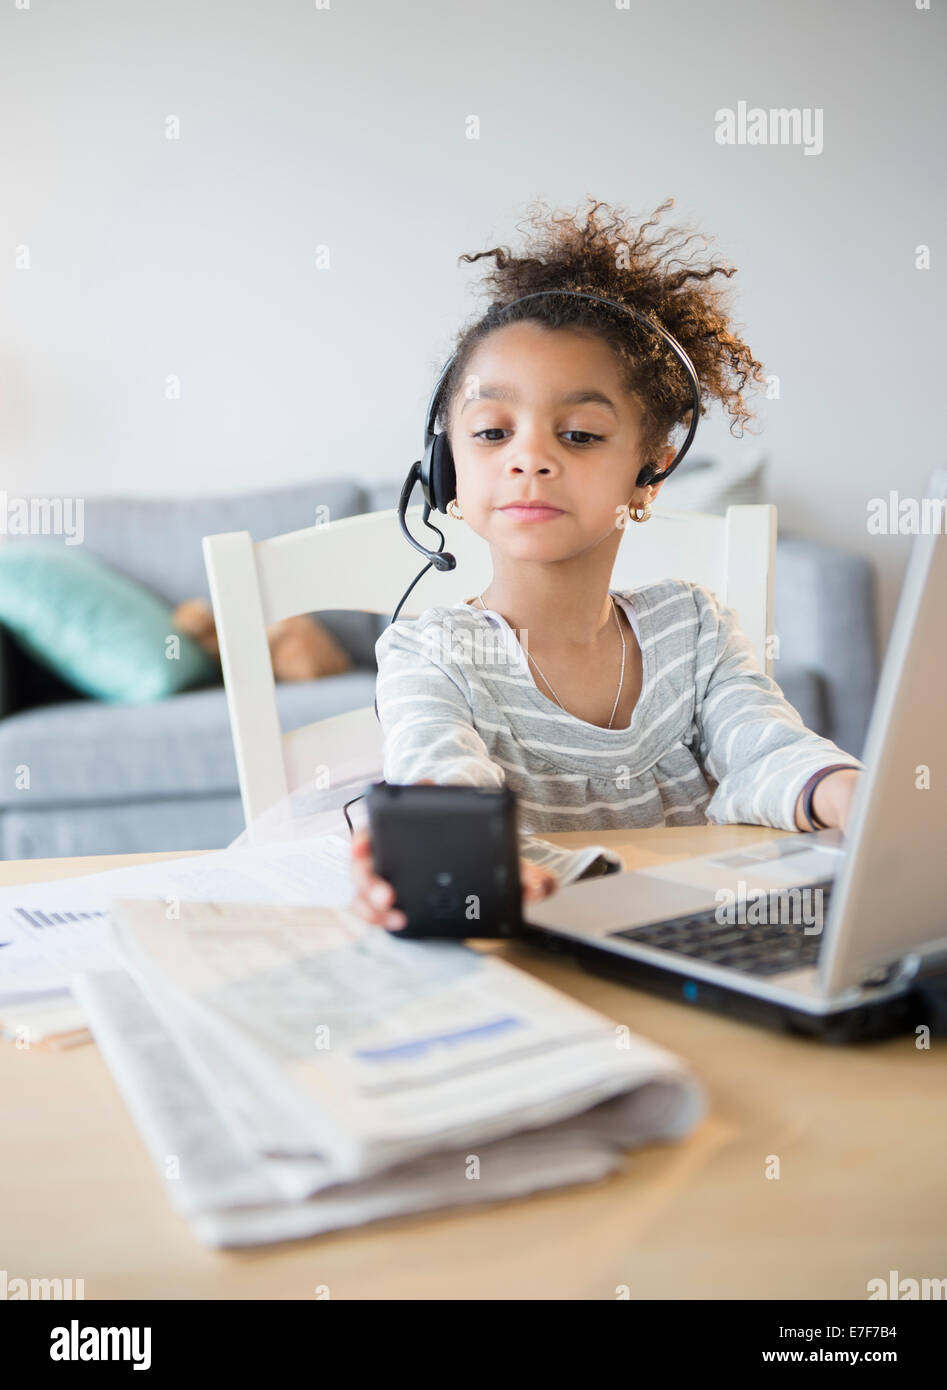 African American girl using headset, cell phone and laptop Stock Photo